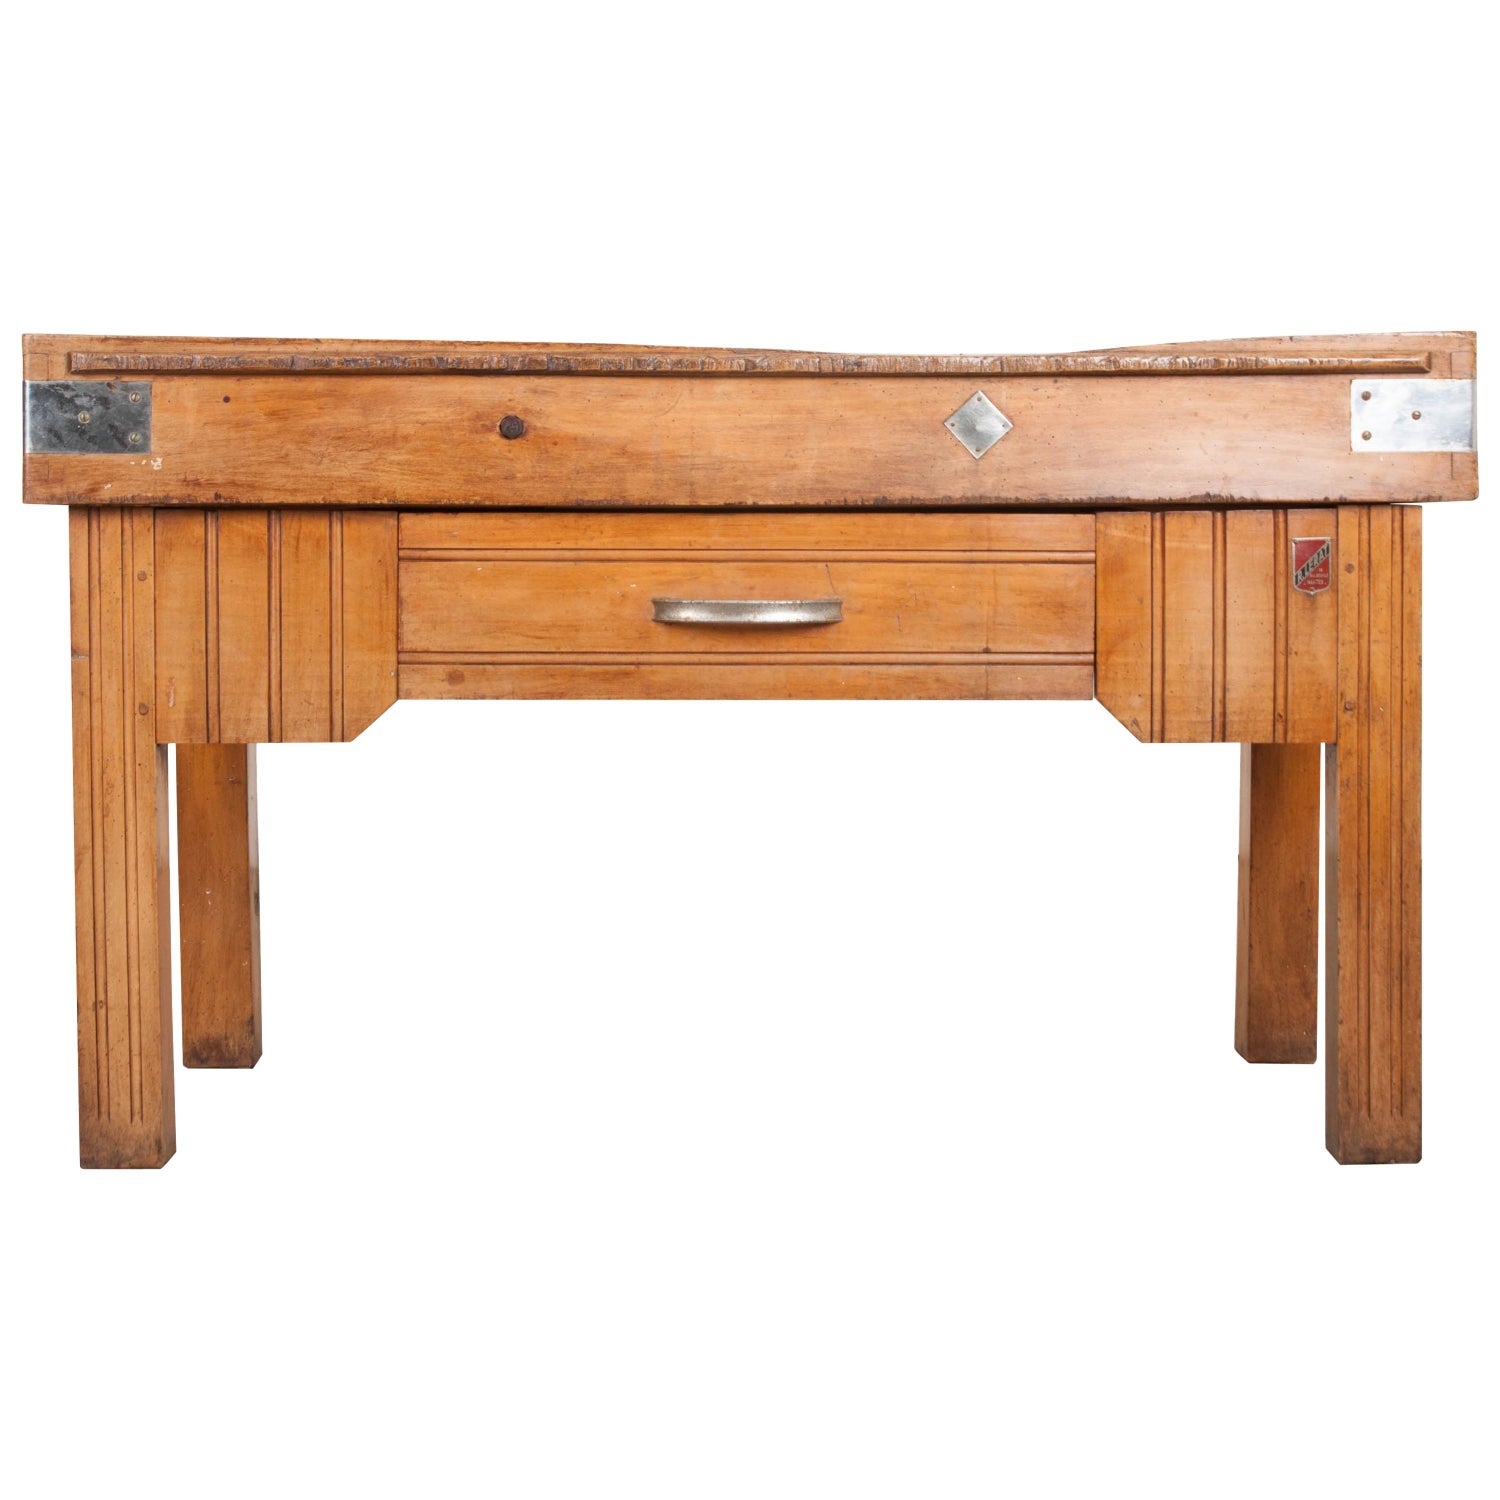 https://a.1stdibscdn.com/french-early-20th-century-art-deco-pine-butcher-block-for-sale/1121189/f_126853711542267658866/12685371_master.jpg?width=1500